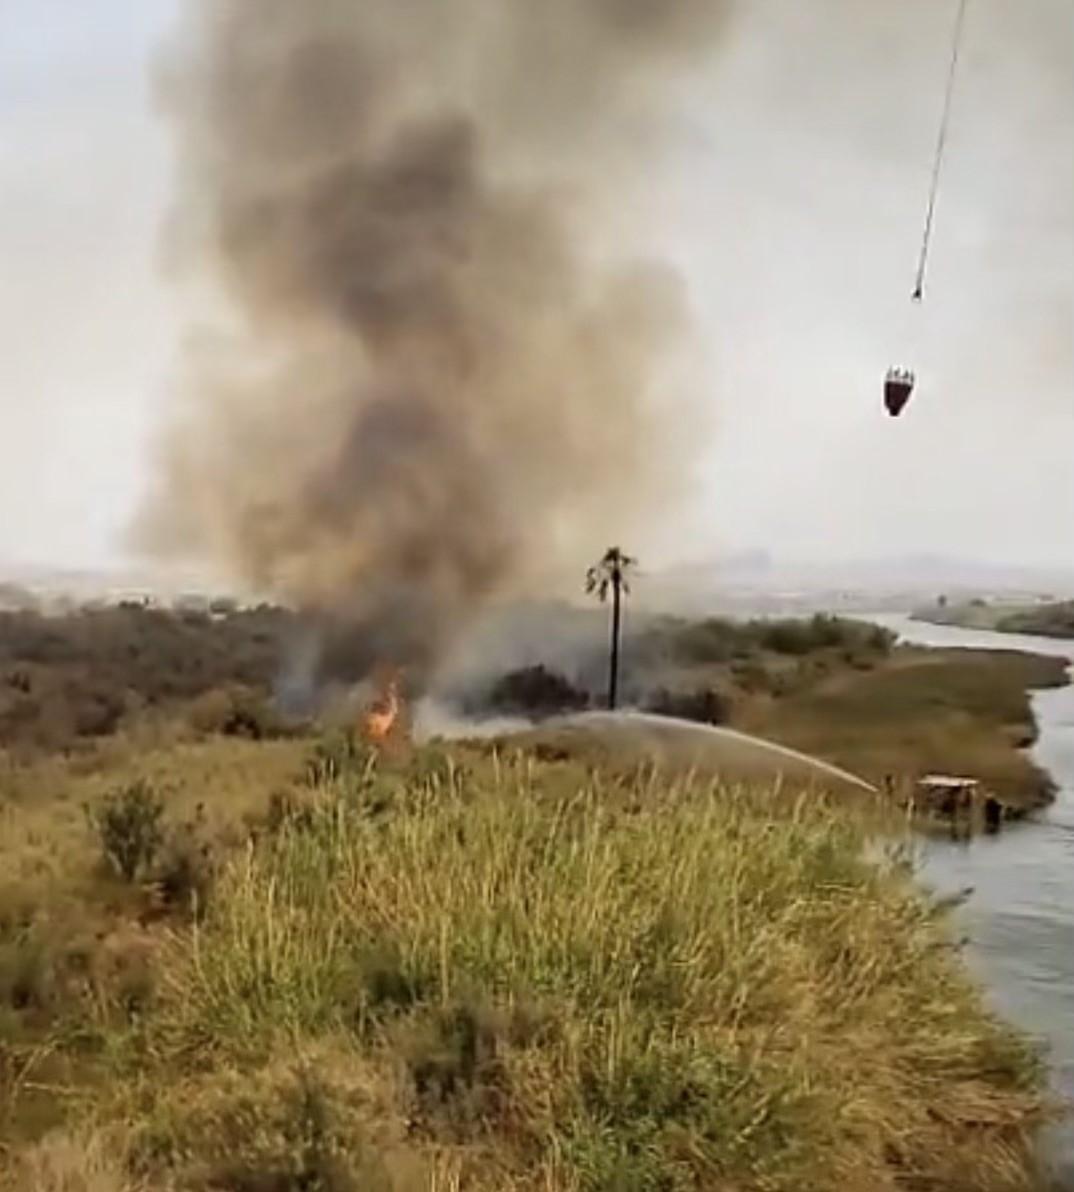 Flames burns salt cedar brush. A boat near river's edge sprays water while a bucket from a helicopter drops water on fire